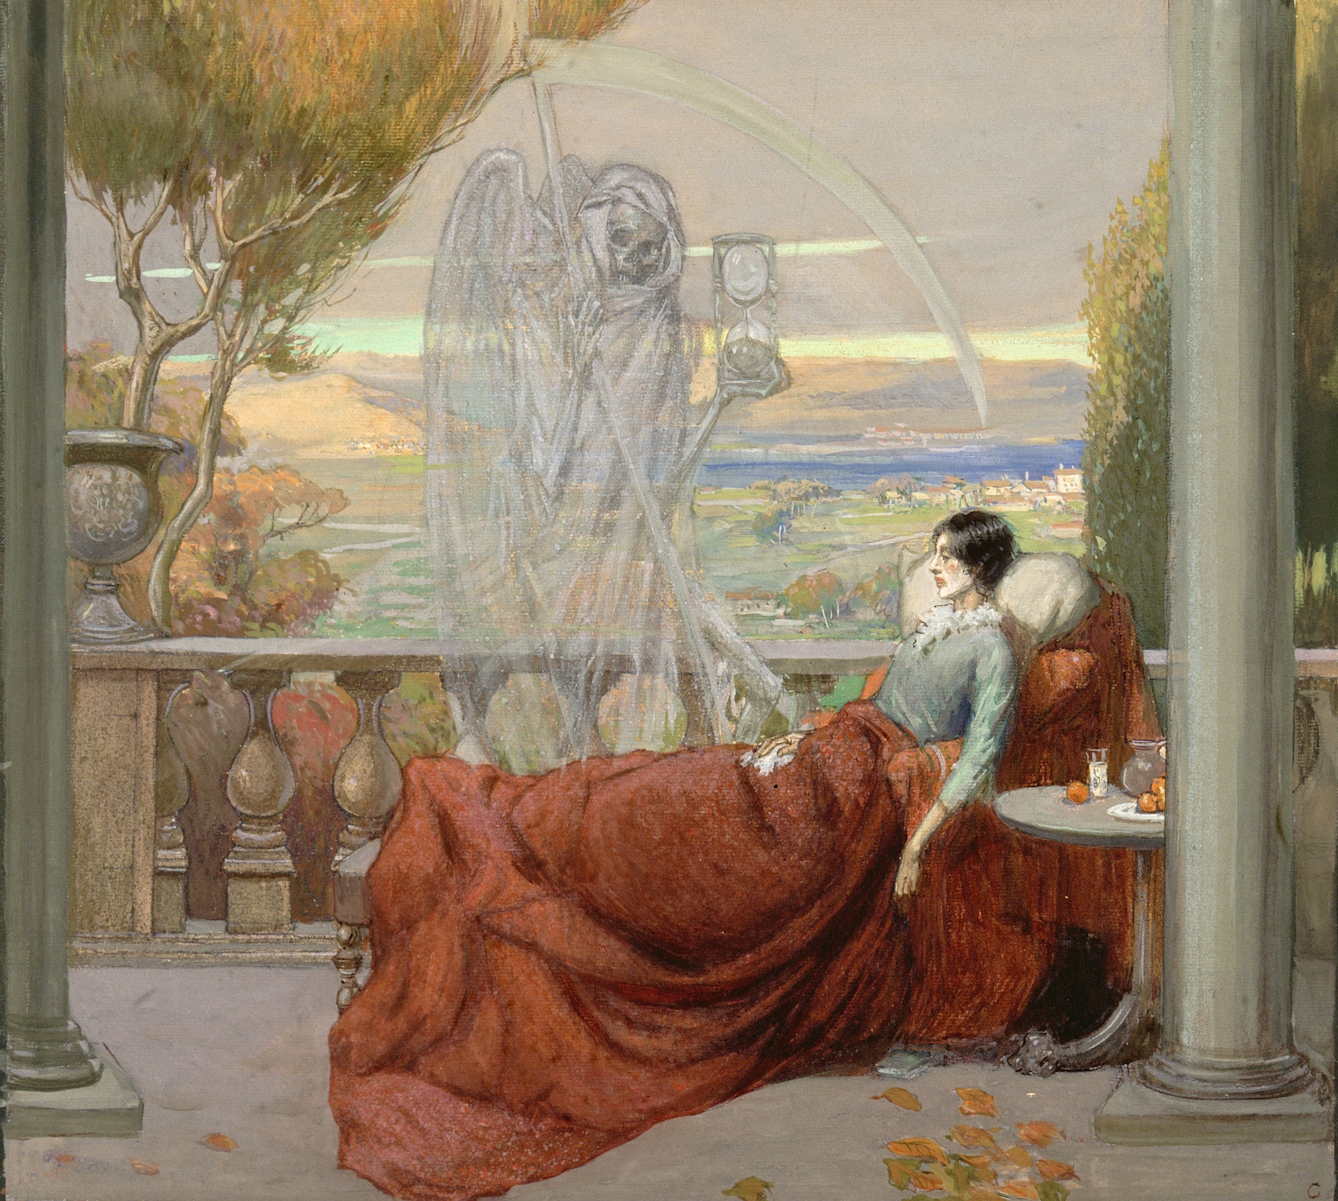 Colour painting of a very pale woman reclining on a balcony with death hovering over her - Death is represented as a ghostly skeleton holding an egg timer and a scythe.